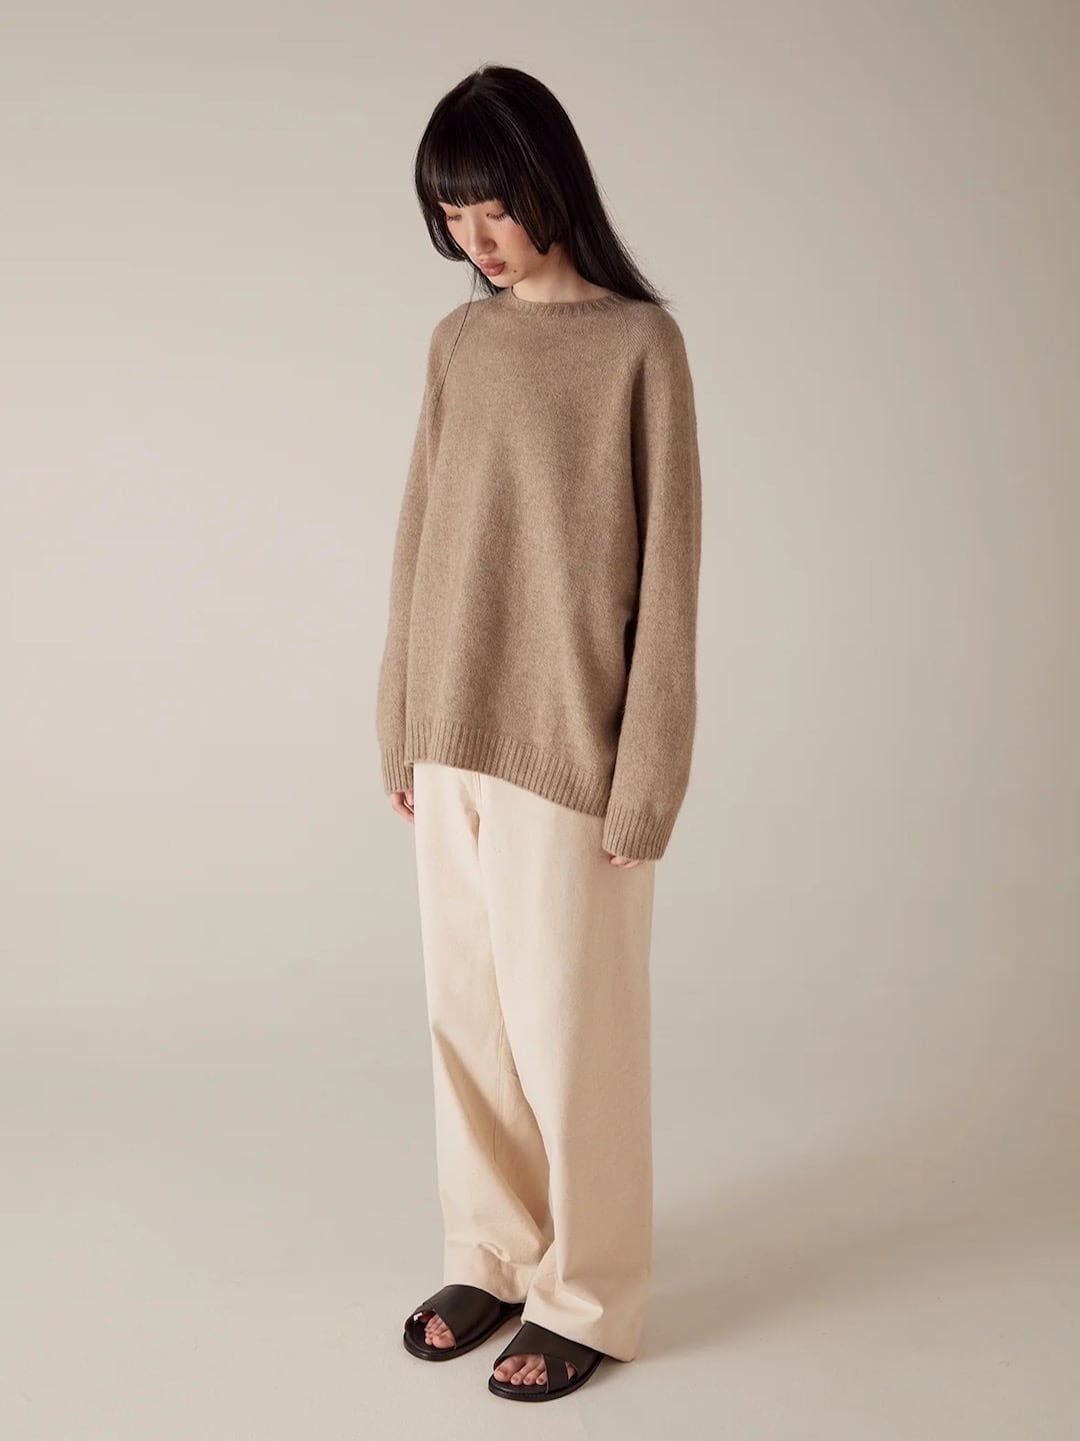 Woman wearing a Francie Nimbus Raglan Knit – Natural sweater and cream pants, standing pensively against a neutral background.